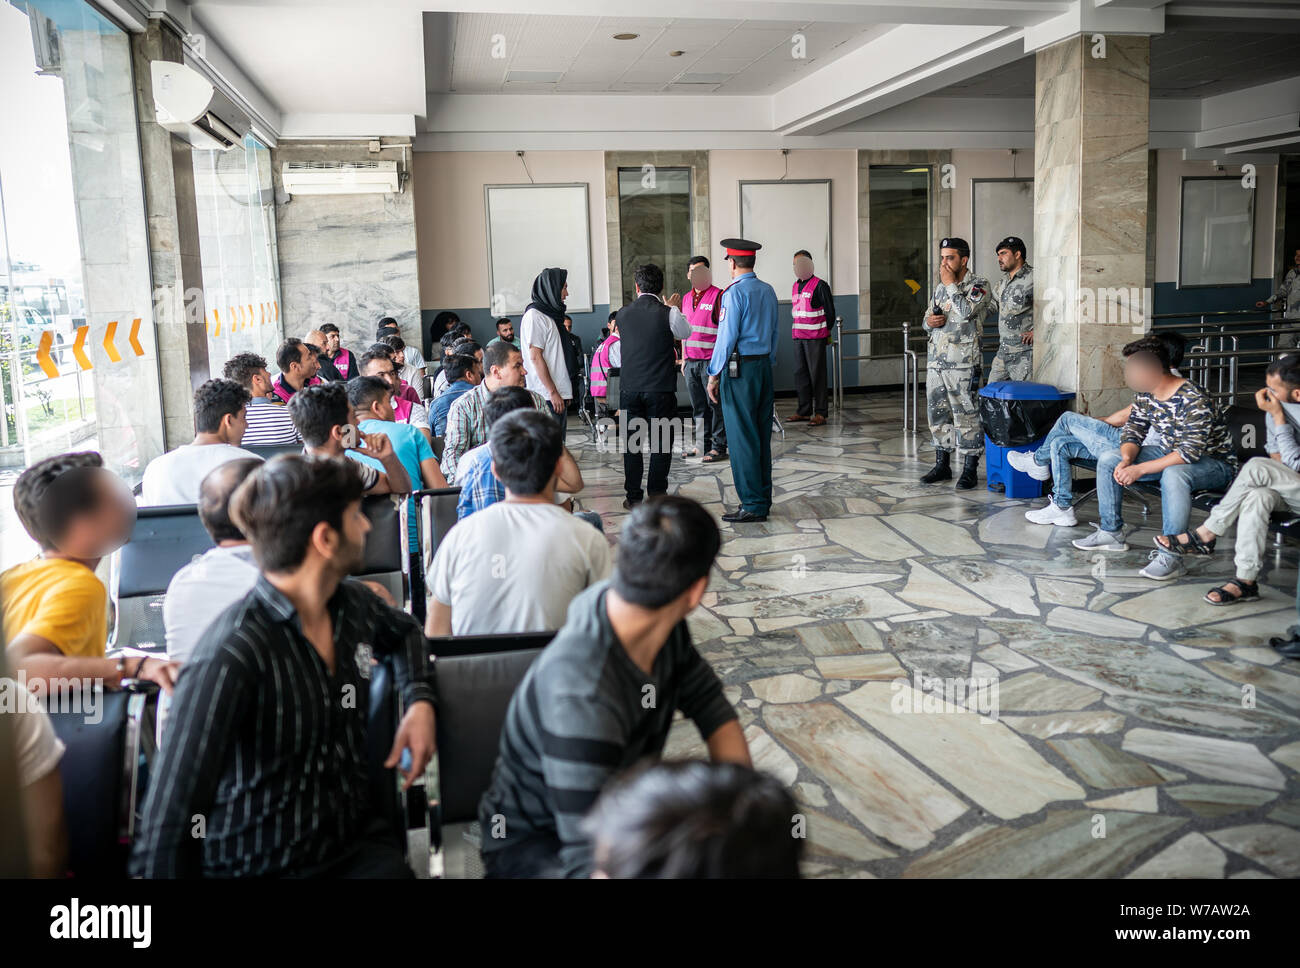 Kabul Afghanistan 01st Aug 2019 Upon Arrival At Kabul Airport Afghans Are Greeted By Officials And Given Instructions On How To Proceed 45 Rejected Asylum Seekers Were Deported On The Special Flight [ 968 x 1300 Pixel ]